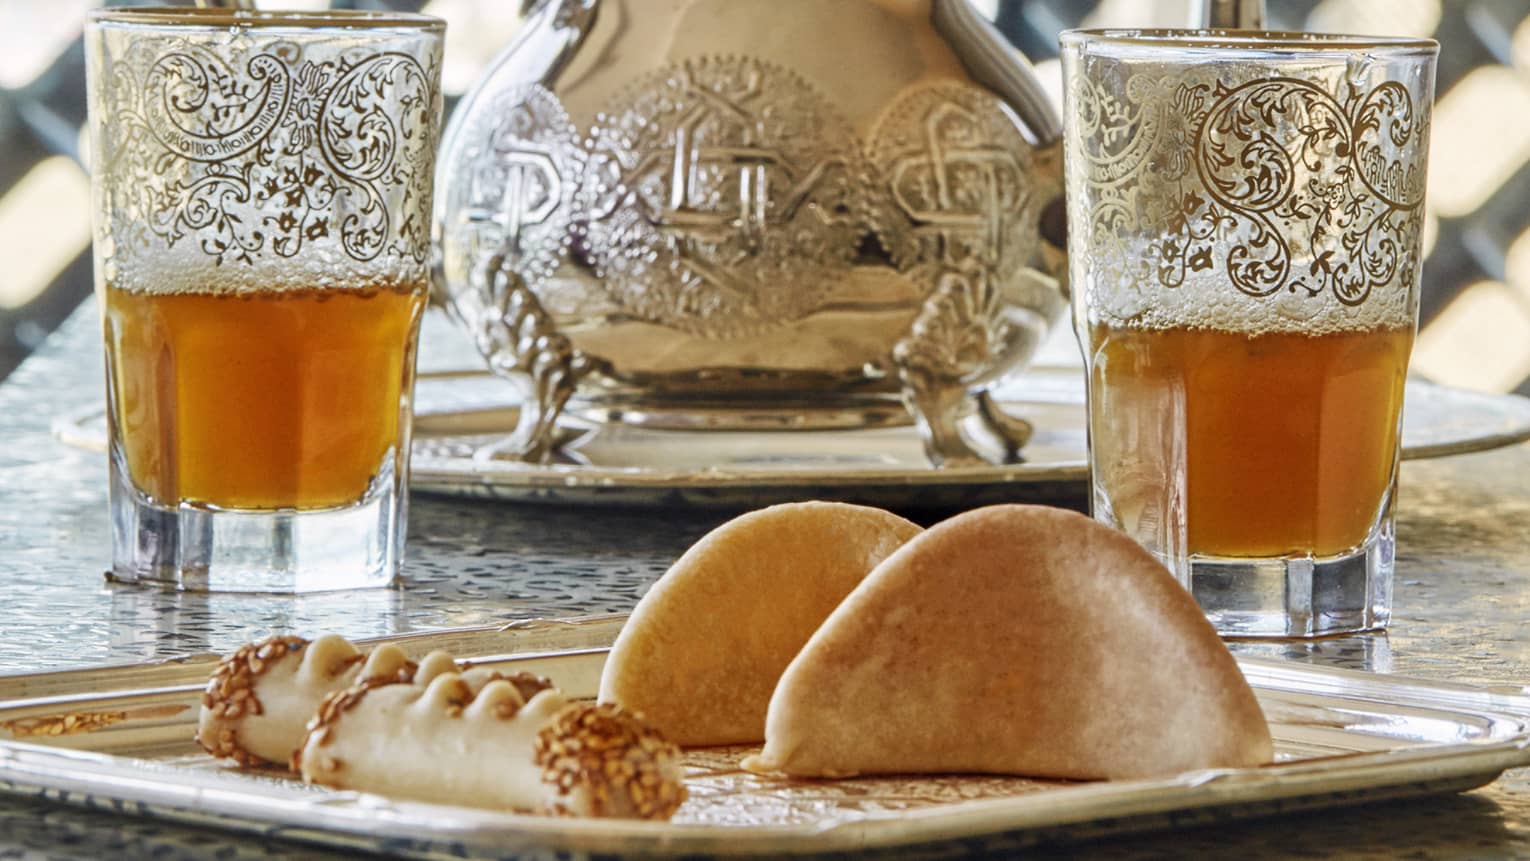 Pastries on tray in front of Moroccan tea glasses 